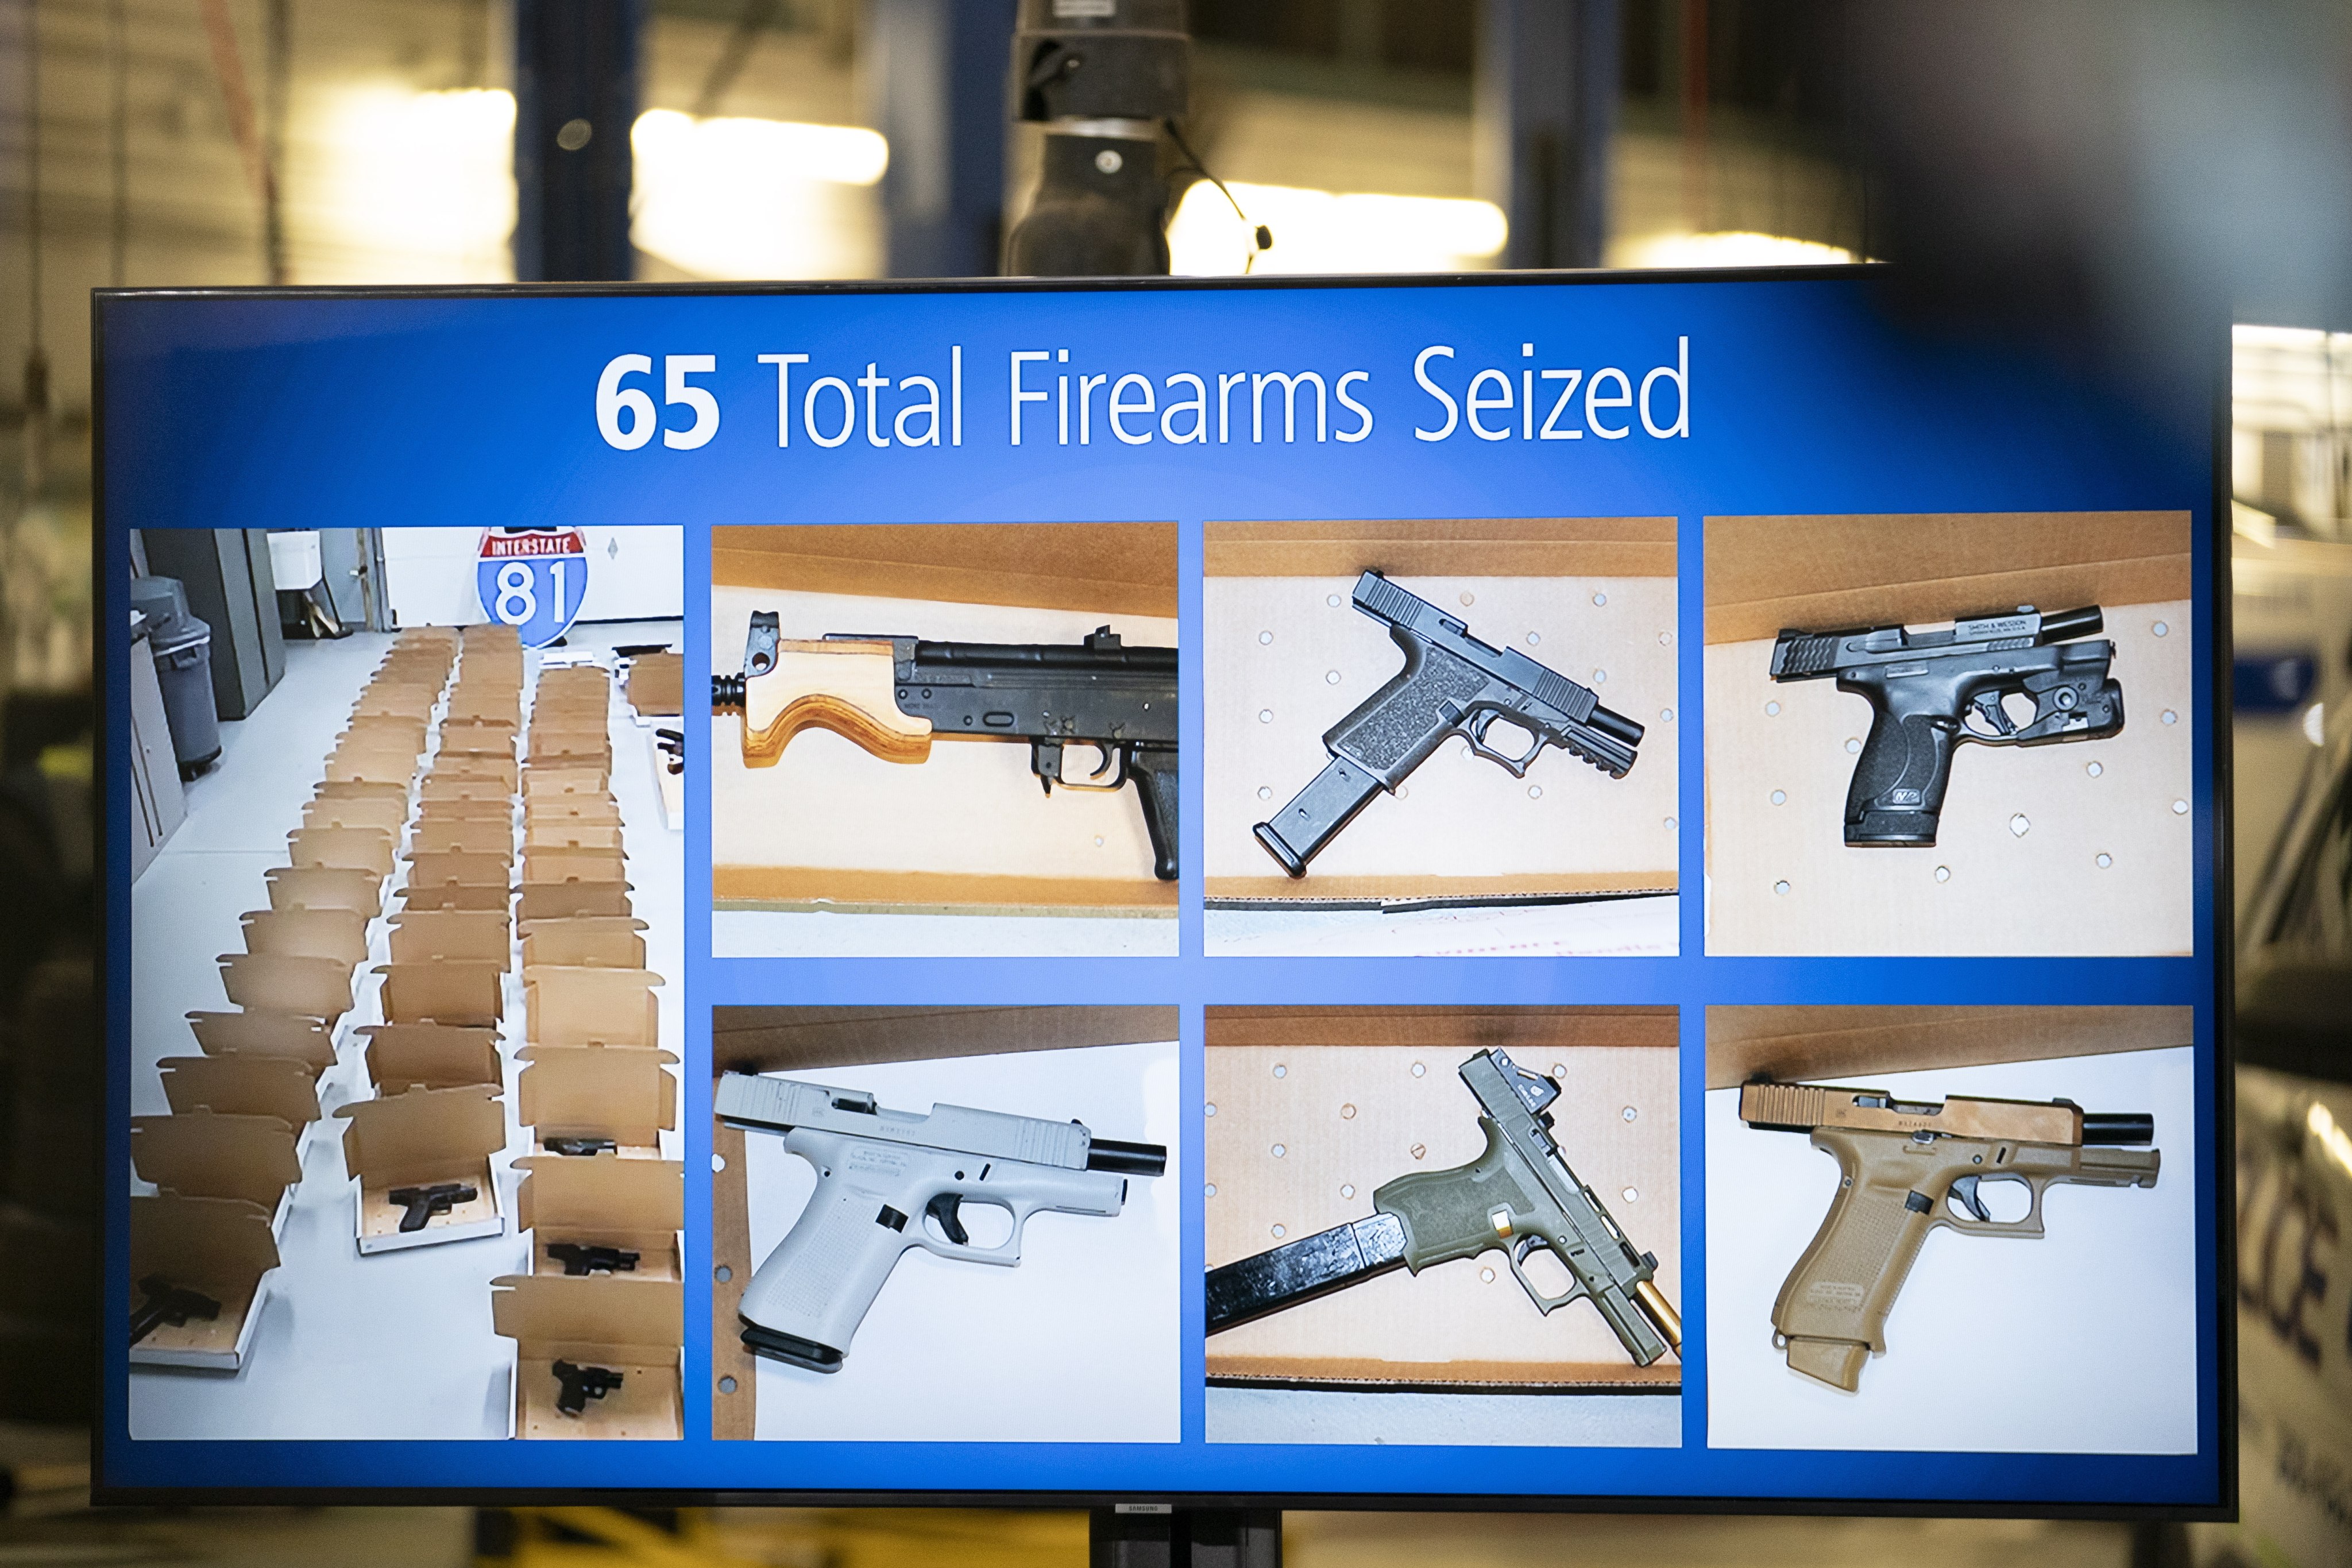 Photos of firearms seized are displayed during a news conference in Brampton, Ontario, Canada on Wednesday. Photo: Canadian Press via AP